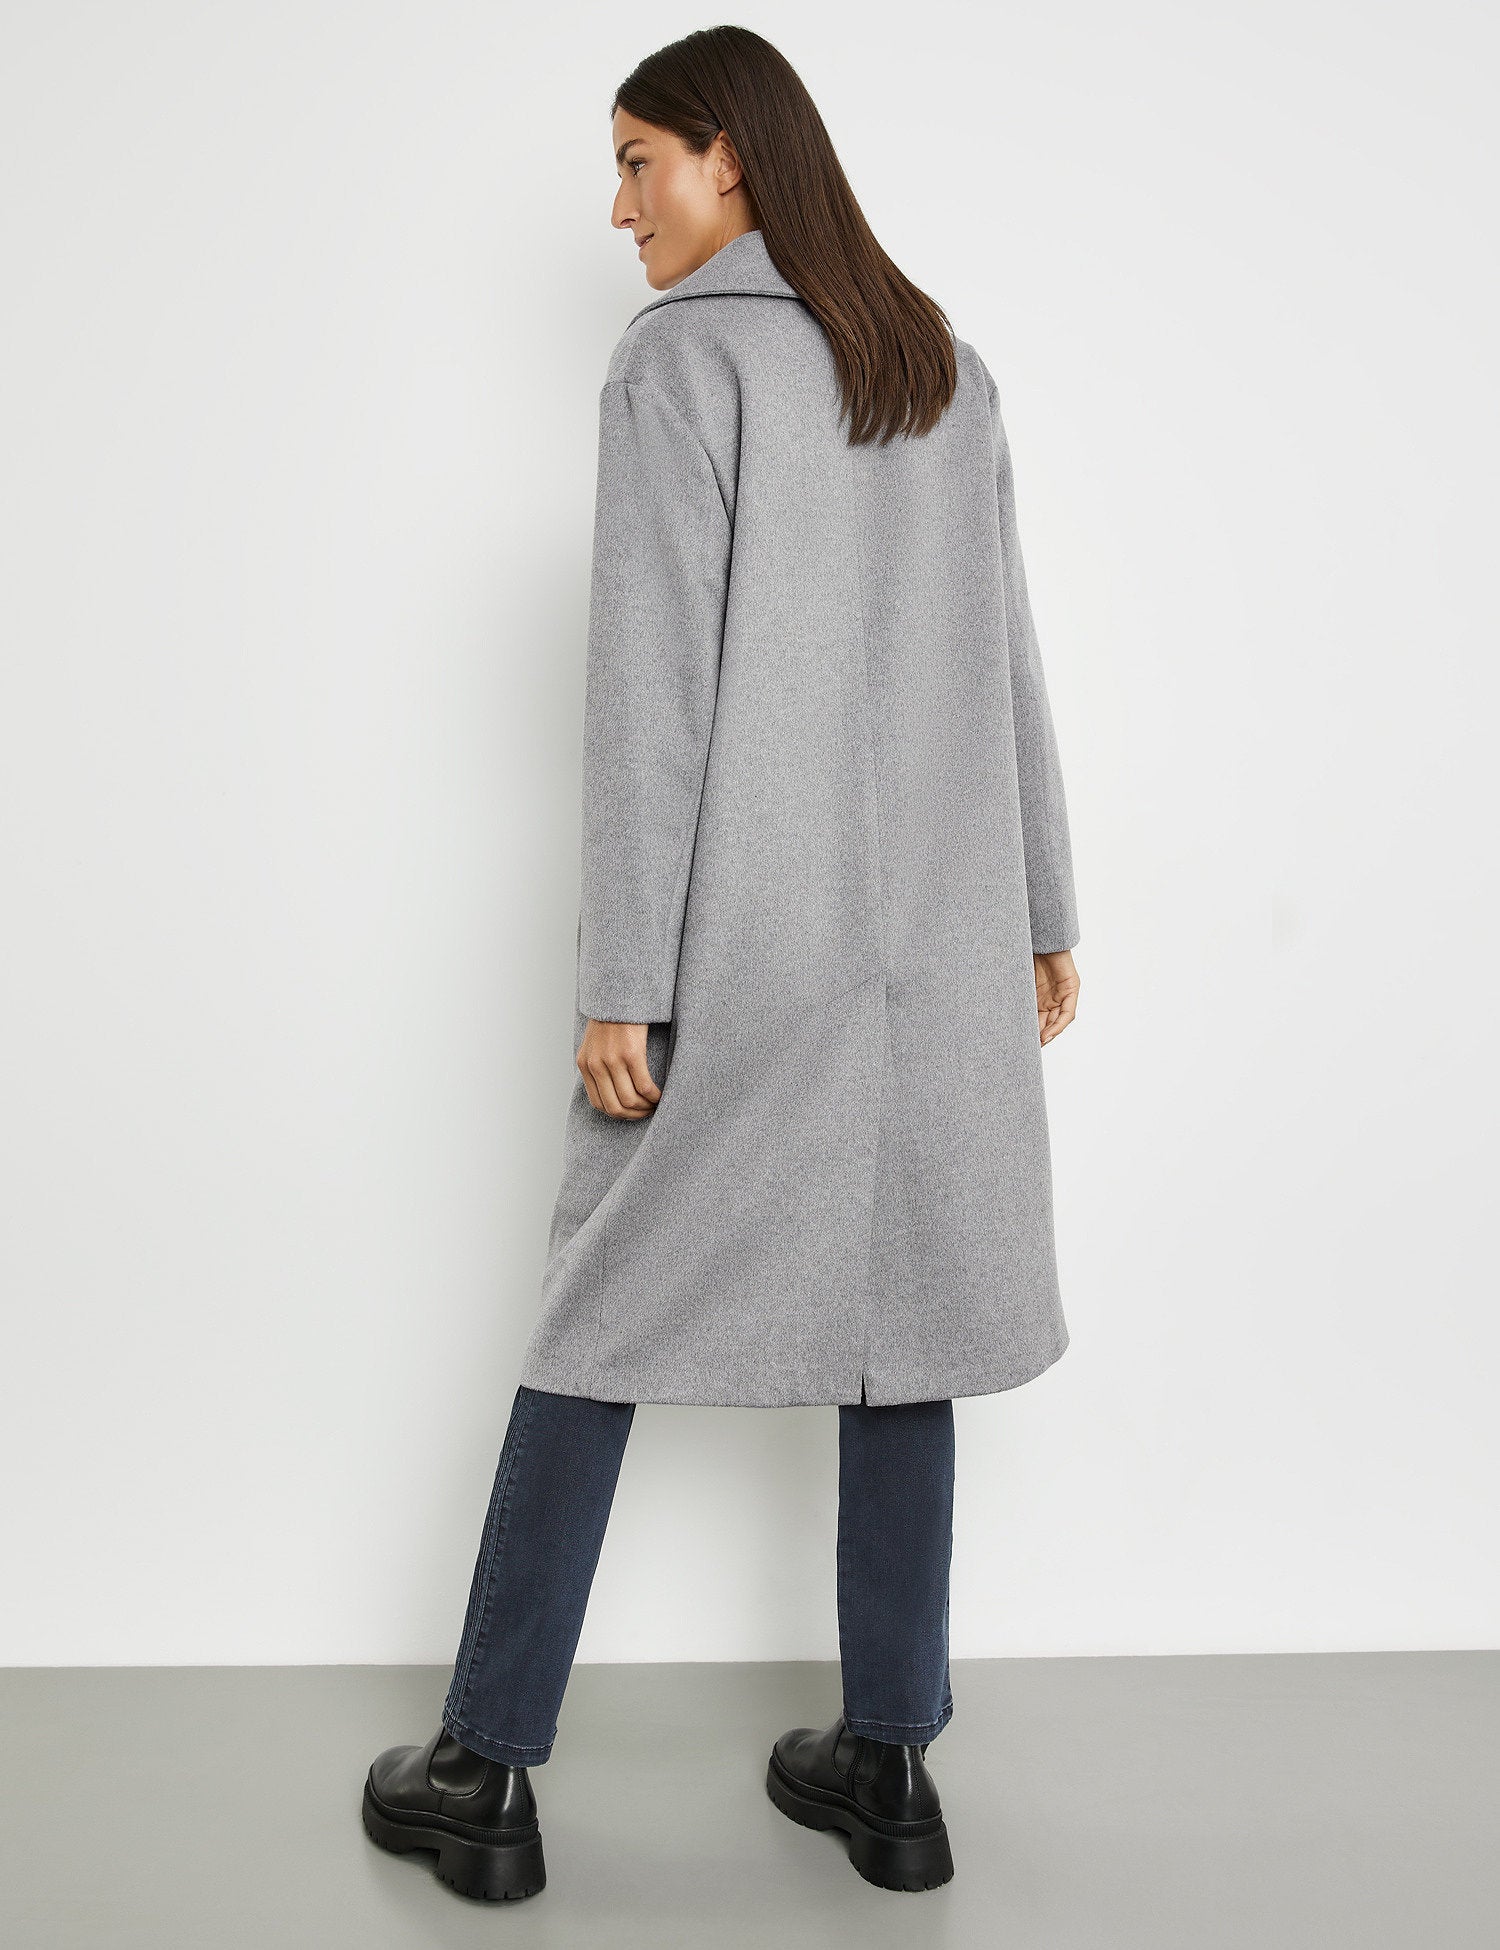 Coat In A Slightly Oversized Cut With Wool_250014-31135_20348_06